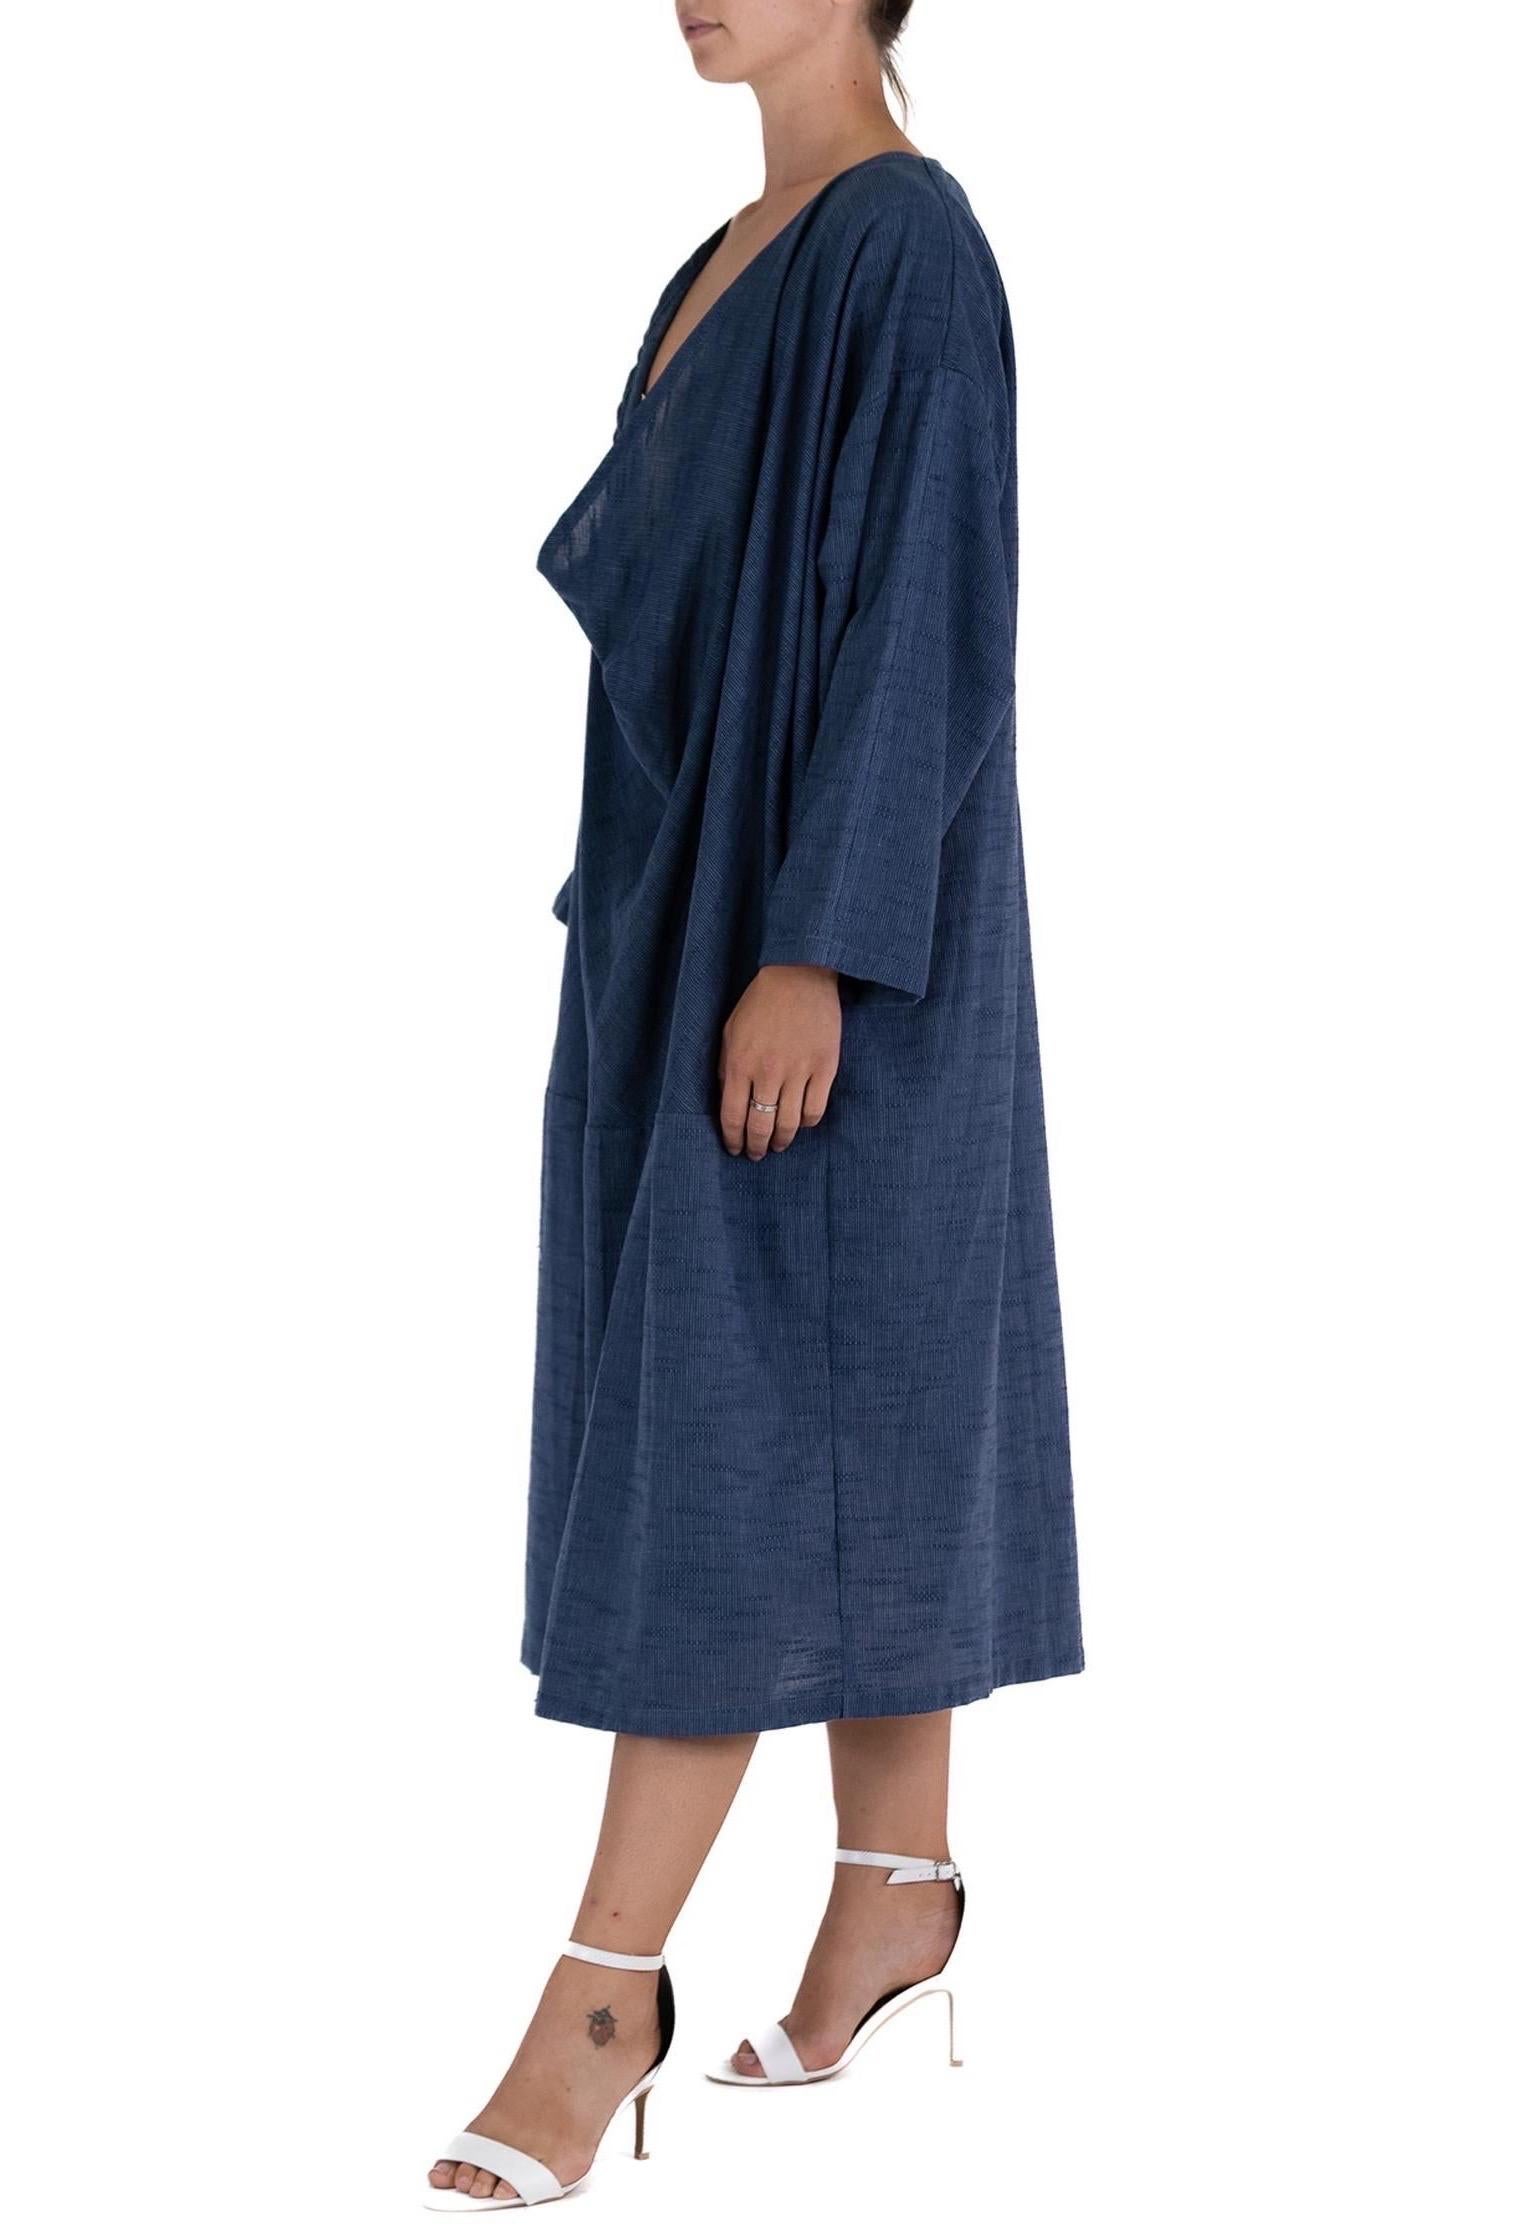 MASTER MORPHEW COLLECTION Indigo Blue Cotton Unisex Cowl Neck Tunic Kaftan In Excellent Condition For Sale In New York, NY